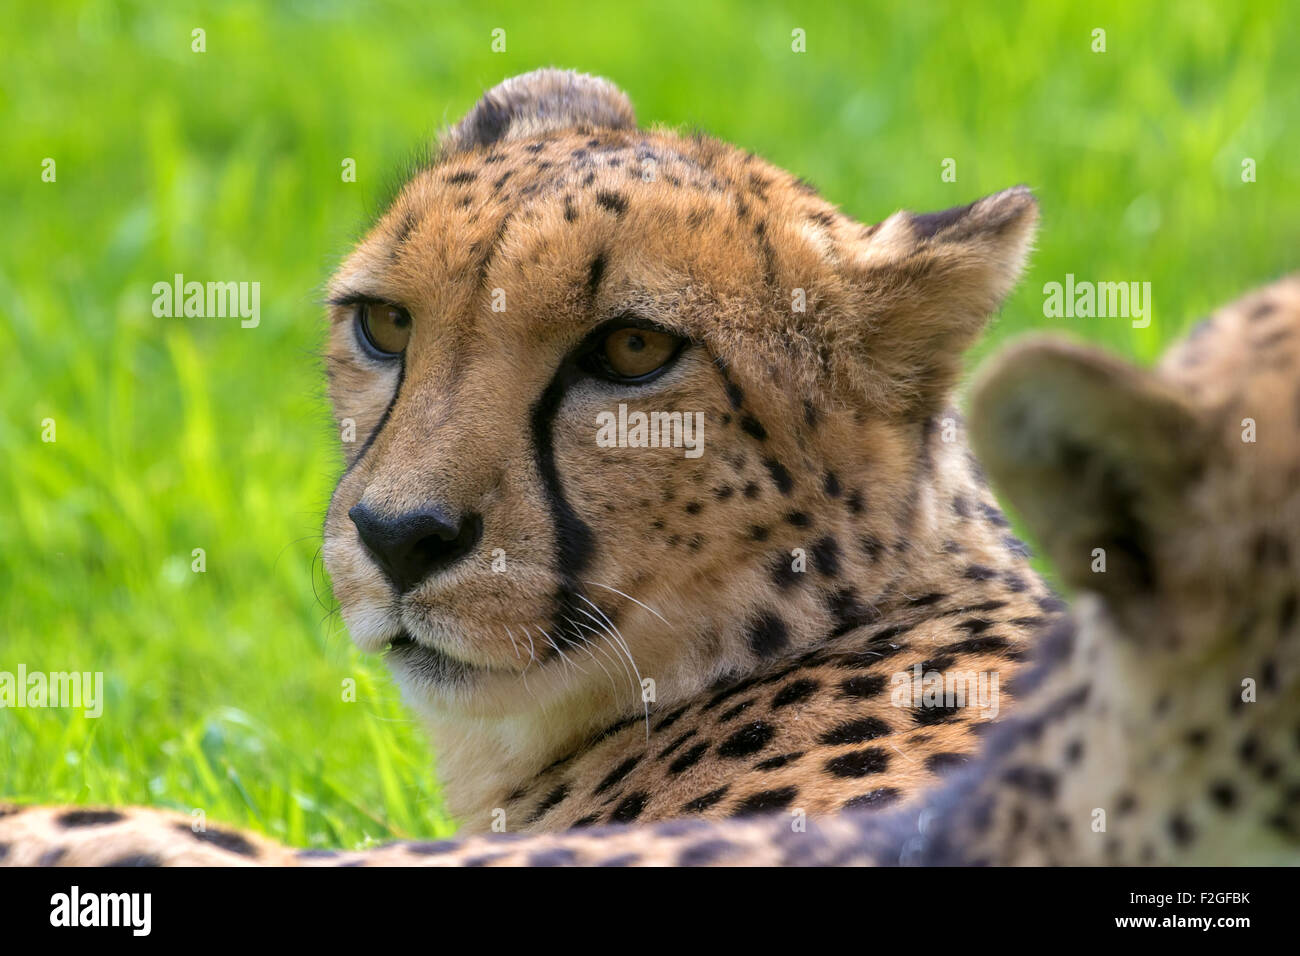 Cheetah Laying Down Resting and Looking Closeup Portrait Stock Photo